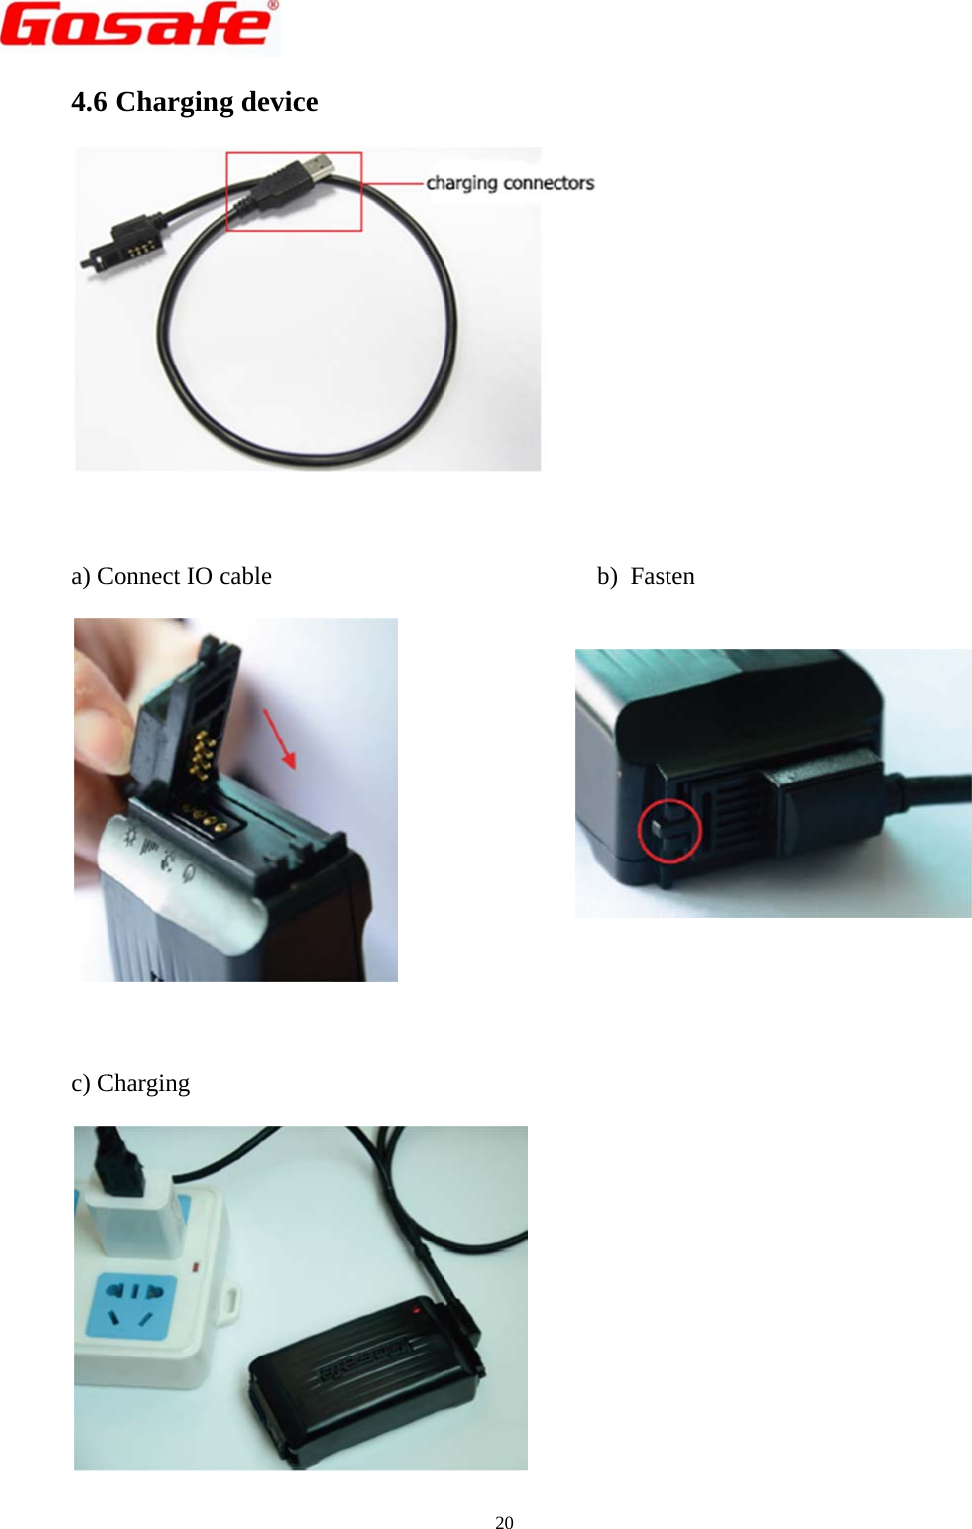        4.6  a) C c) C                   CharginConnect IO Charging                    g device cable                                                                 20                                            b)  Fast                  Gten                   G1SL User M       Manual